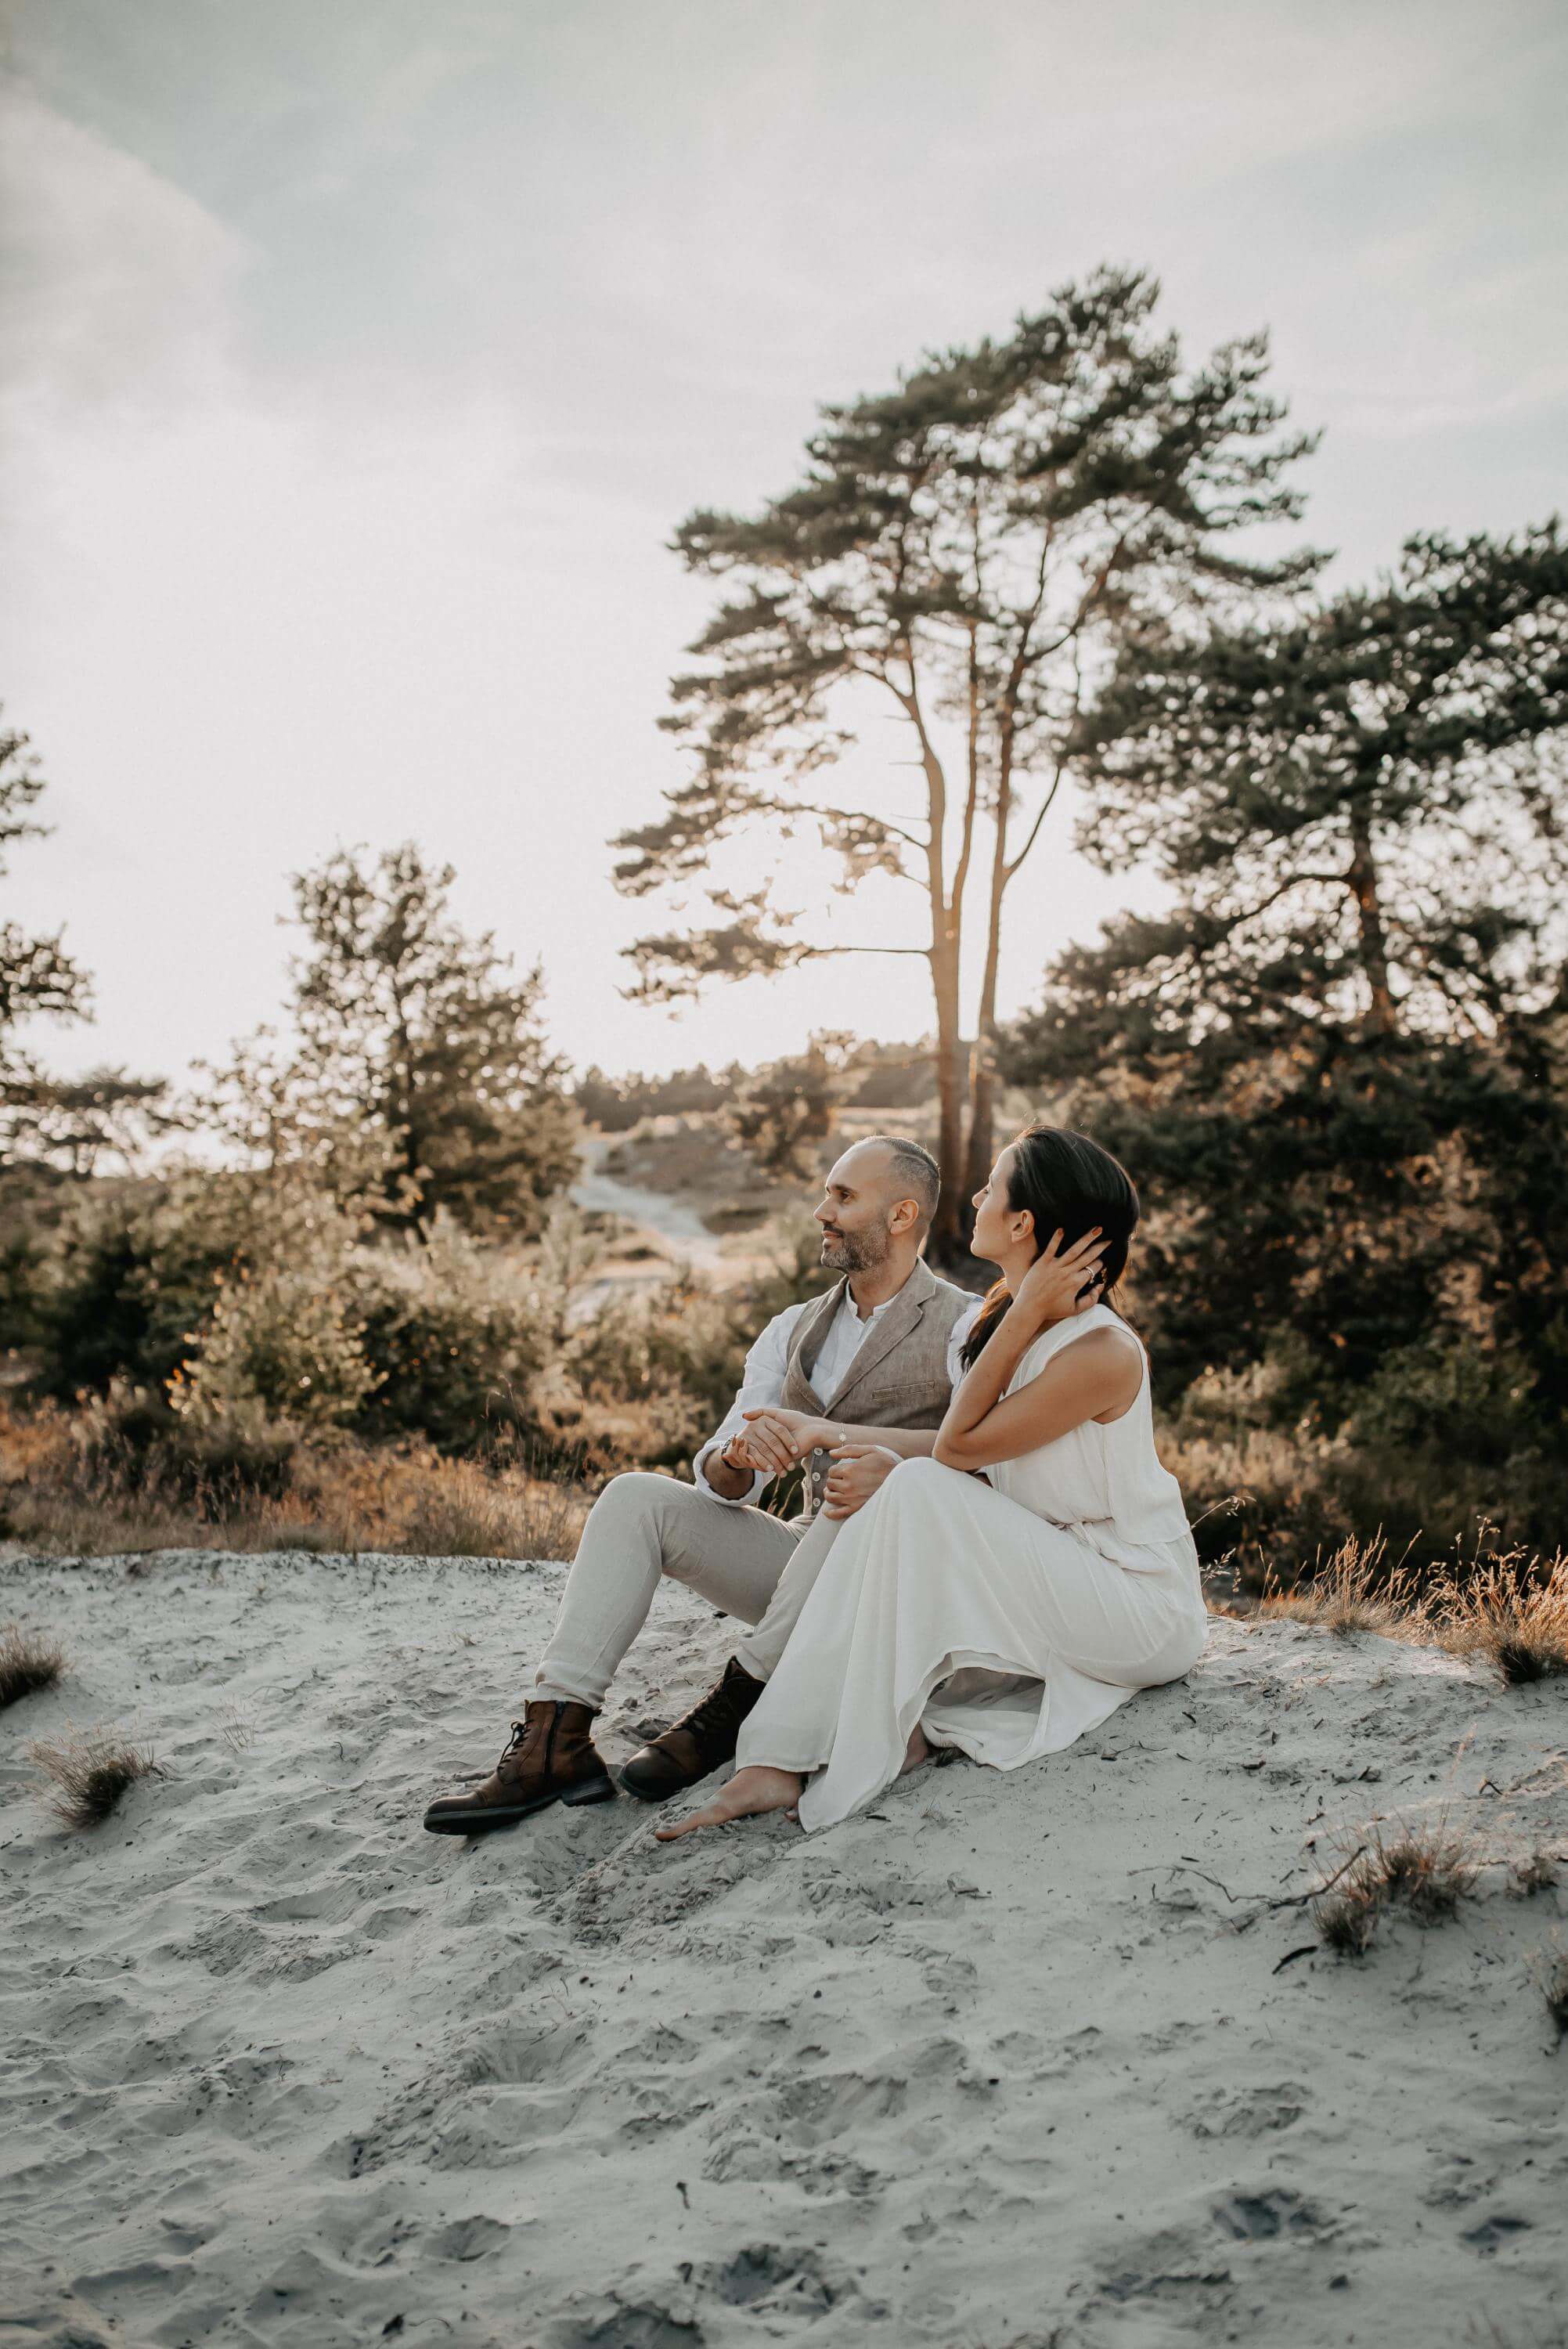 Photo with details of Hochzeit Brunssummer Heide Strand Paarshooting and Engagement of category Hochzeit